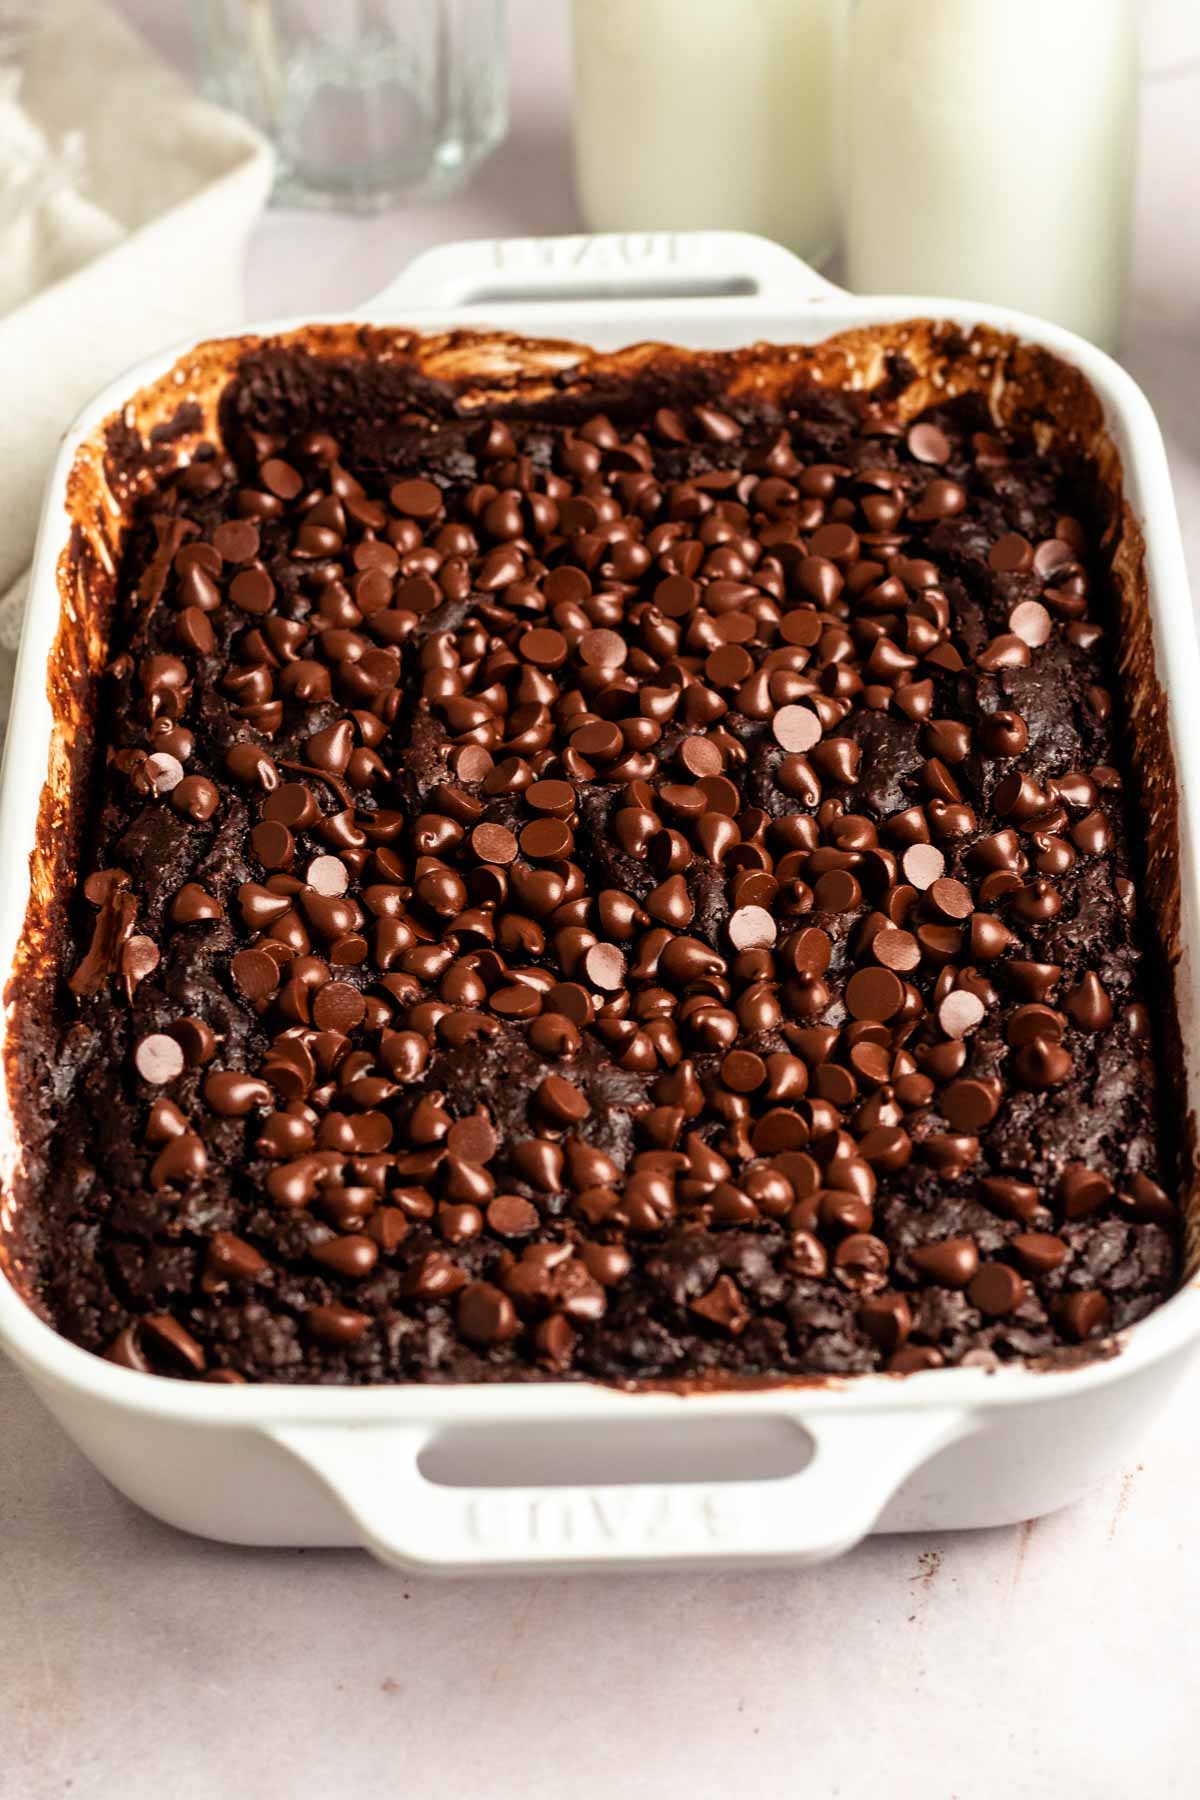 Close up shot of chocolate dump cake with chocolate chips on top.